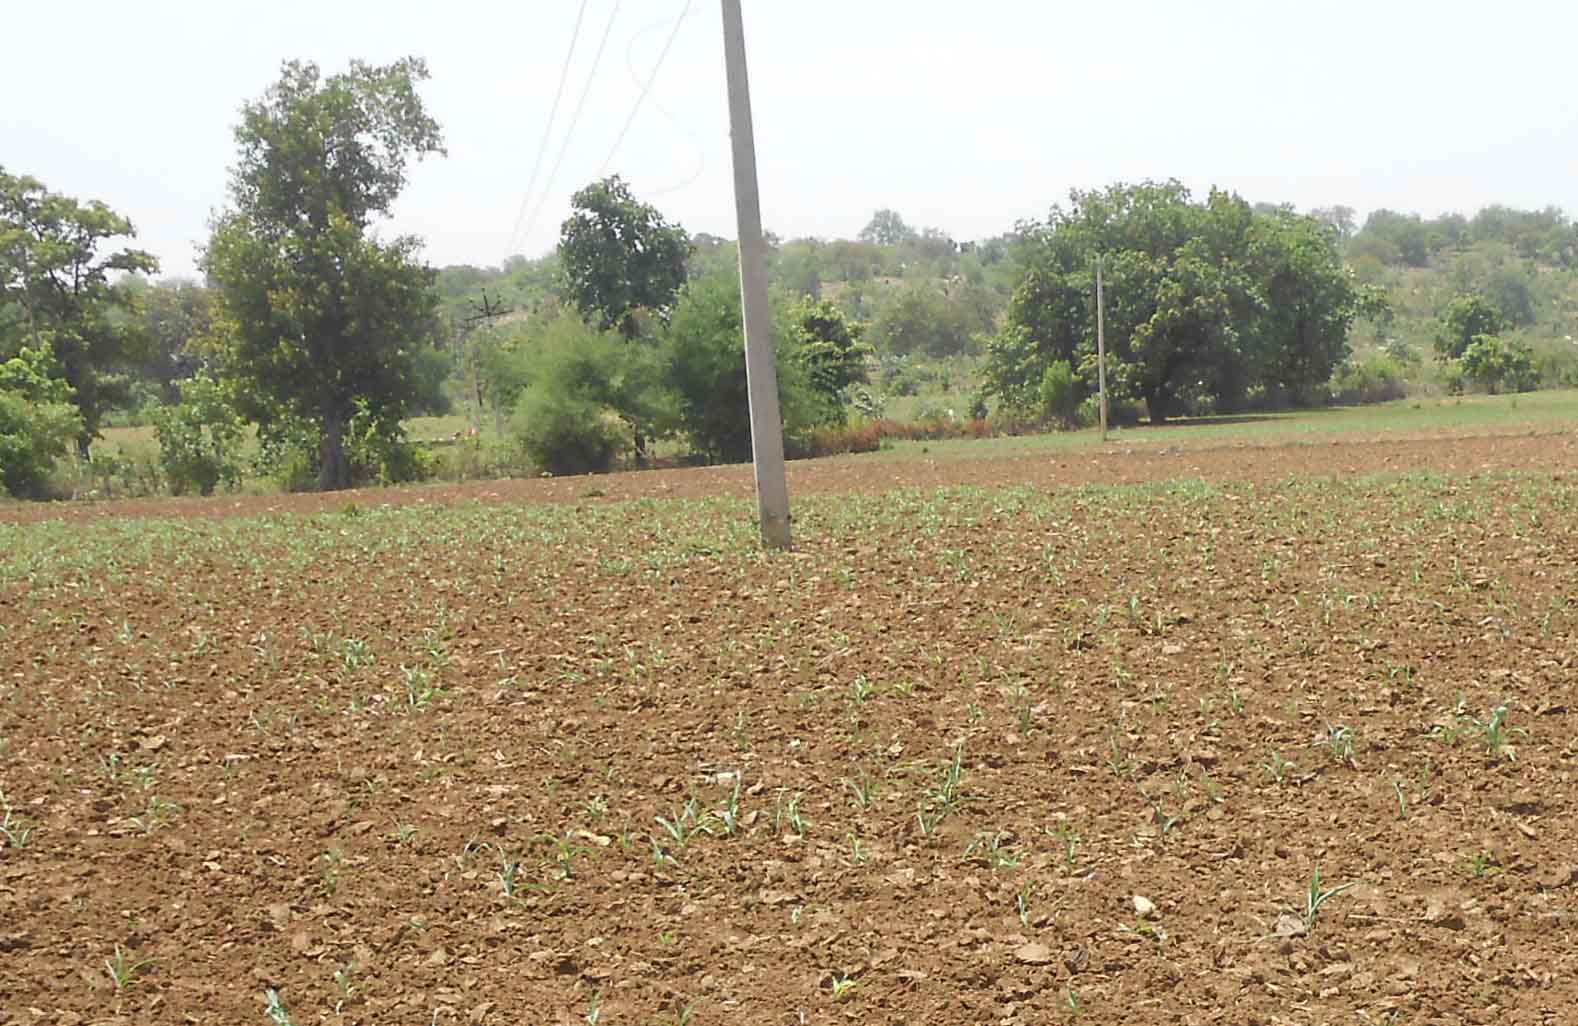 Farmers who have put seeds now suffer from the absence of rain